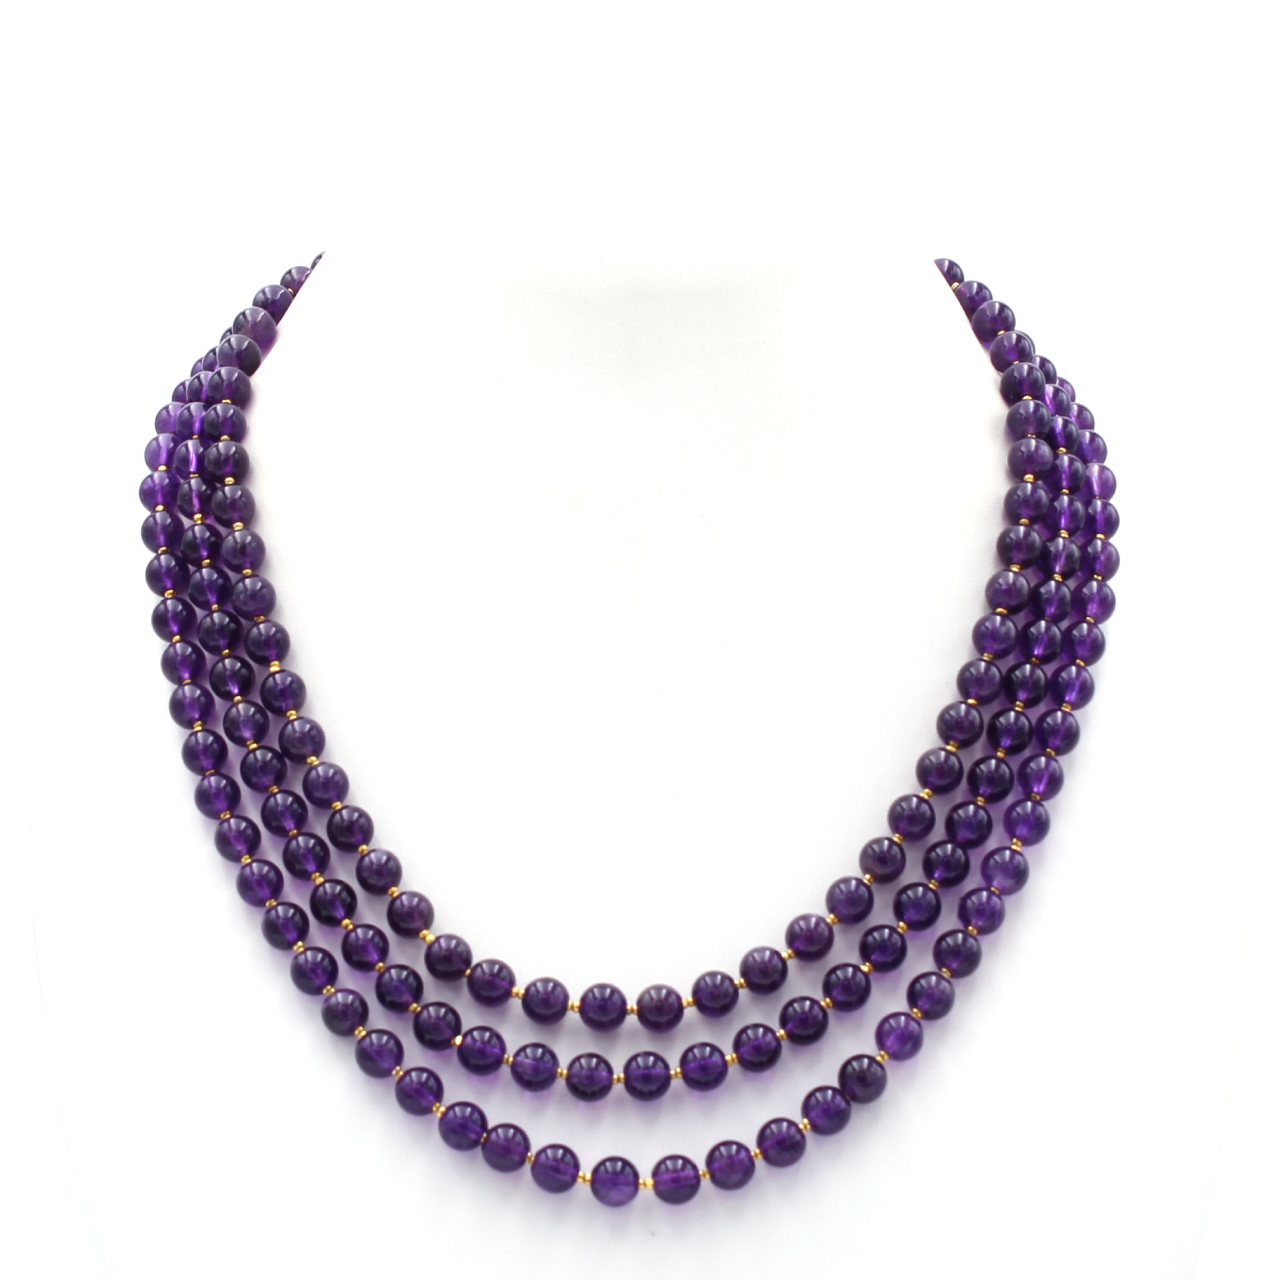 Three Layer Amethyst Necklace with Gold Beads